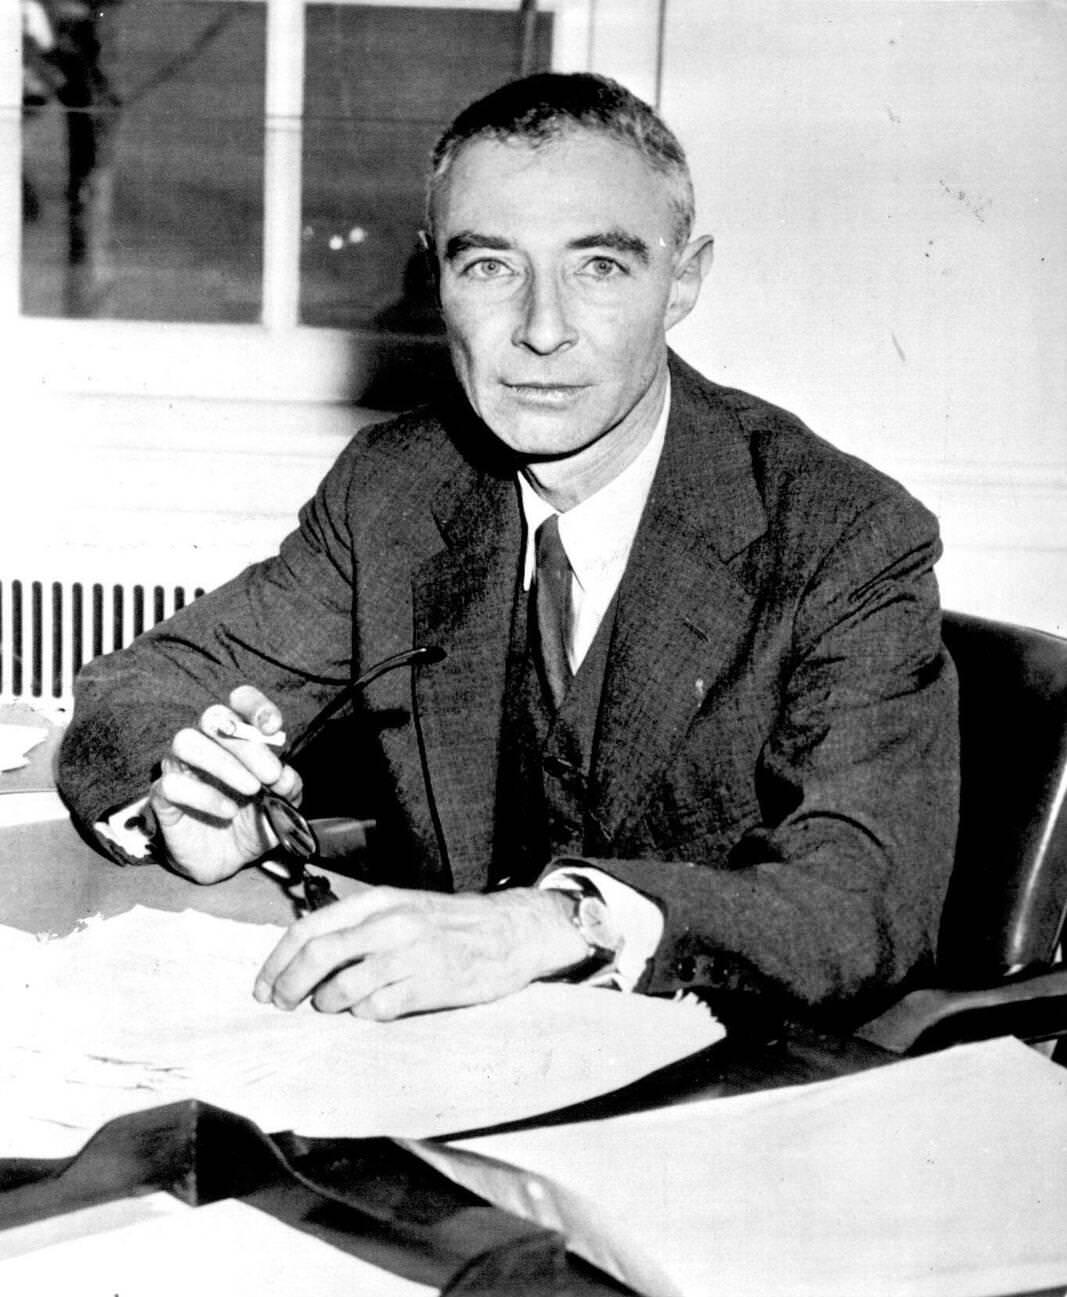 Dr. J. Robert Oppenheimer at his desk, discussing his barring from atomic secrets, June 2, 1954.